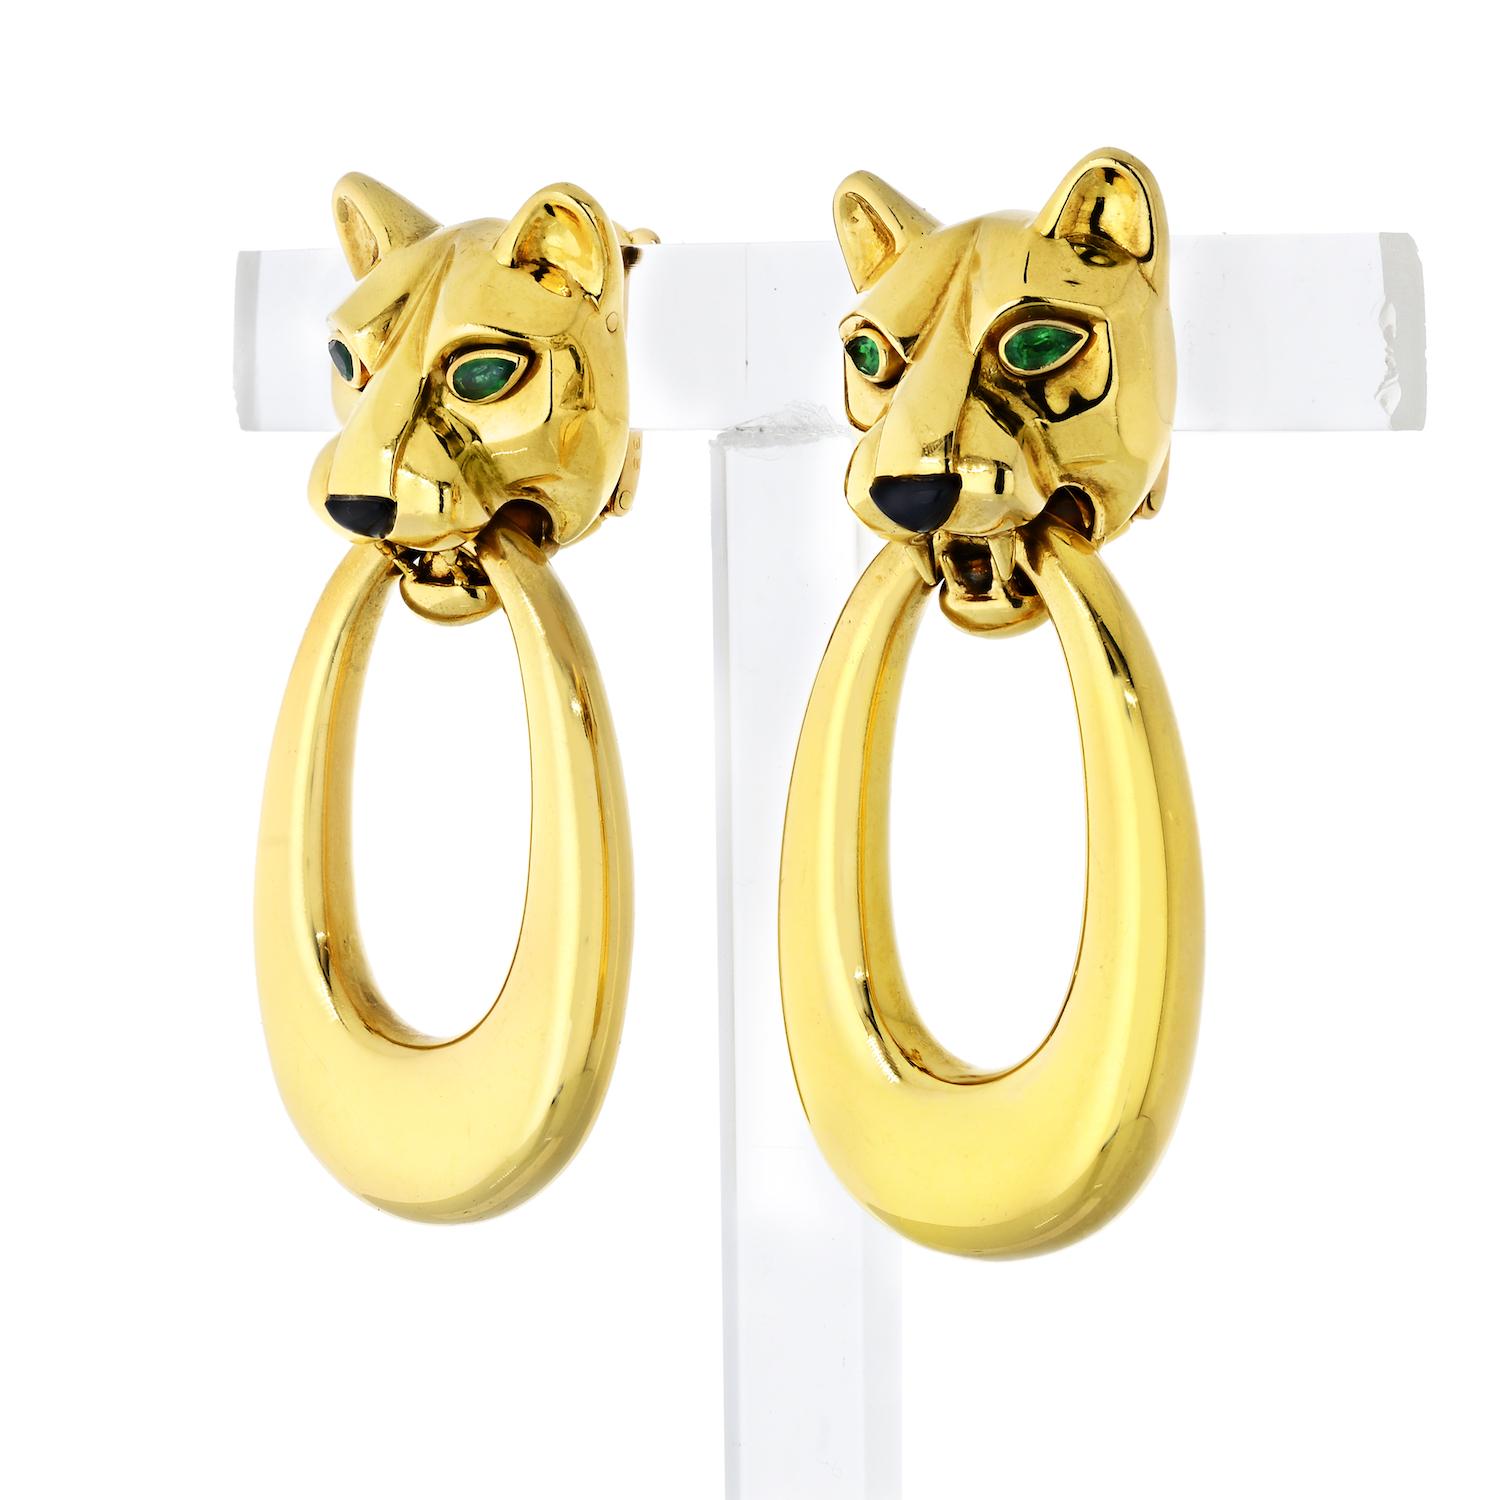 Exquisite pair of Cartier door knocker style panthere earrings. These are classic and versatile earrings that are no longer in production. They allow the wearer the option to remove the loops and wear pantheres on their own. The earrings are signed